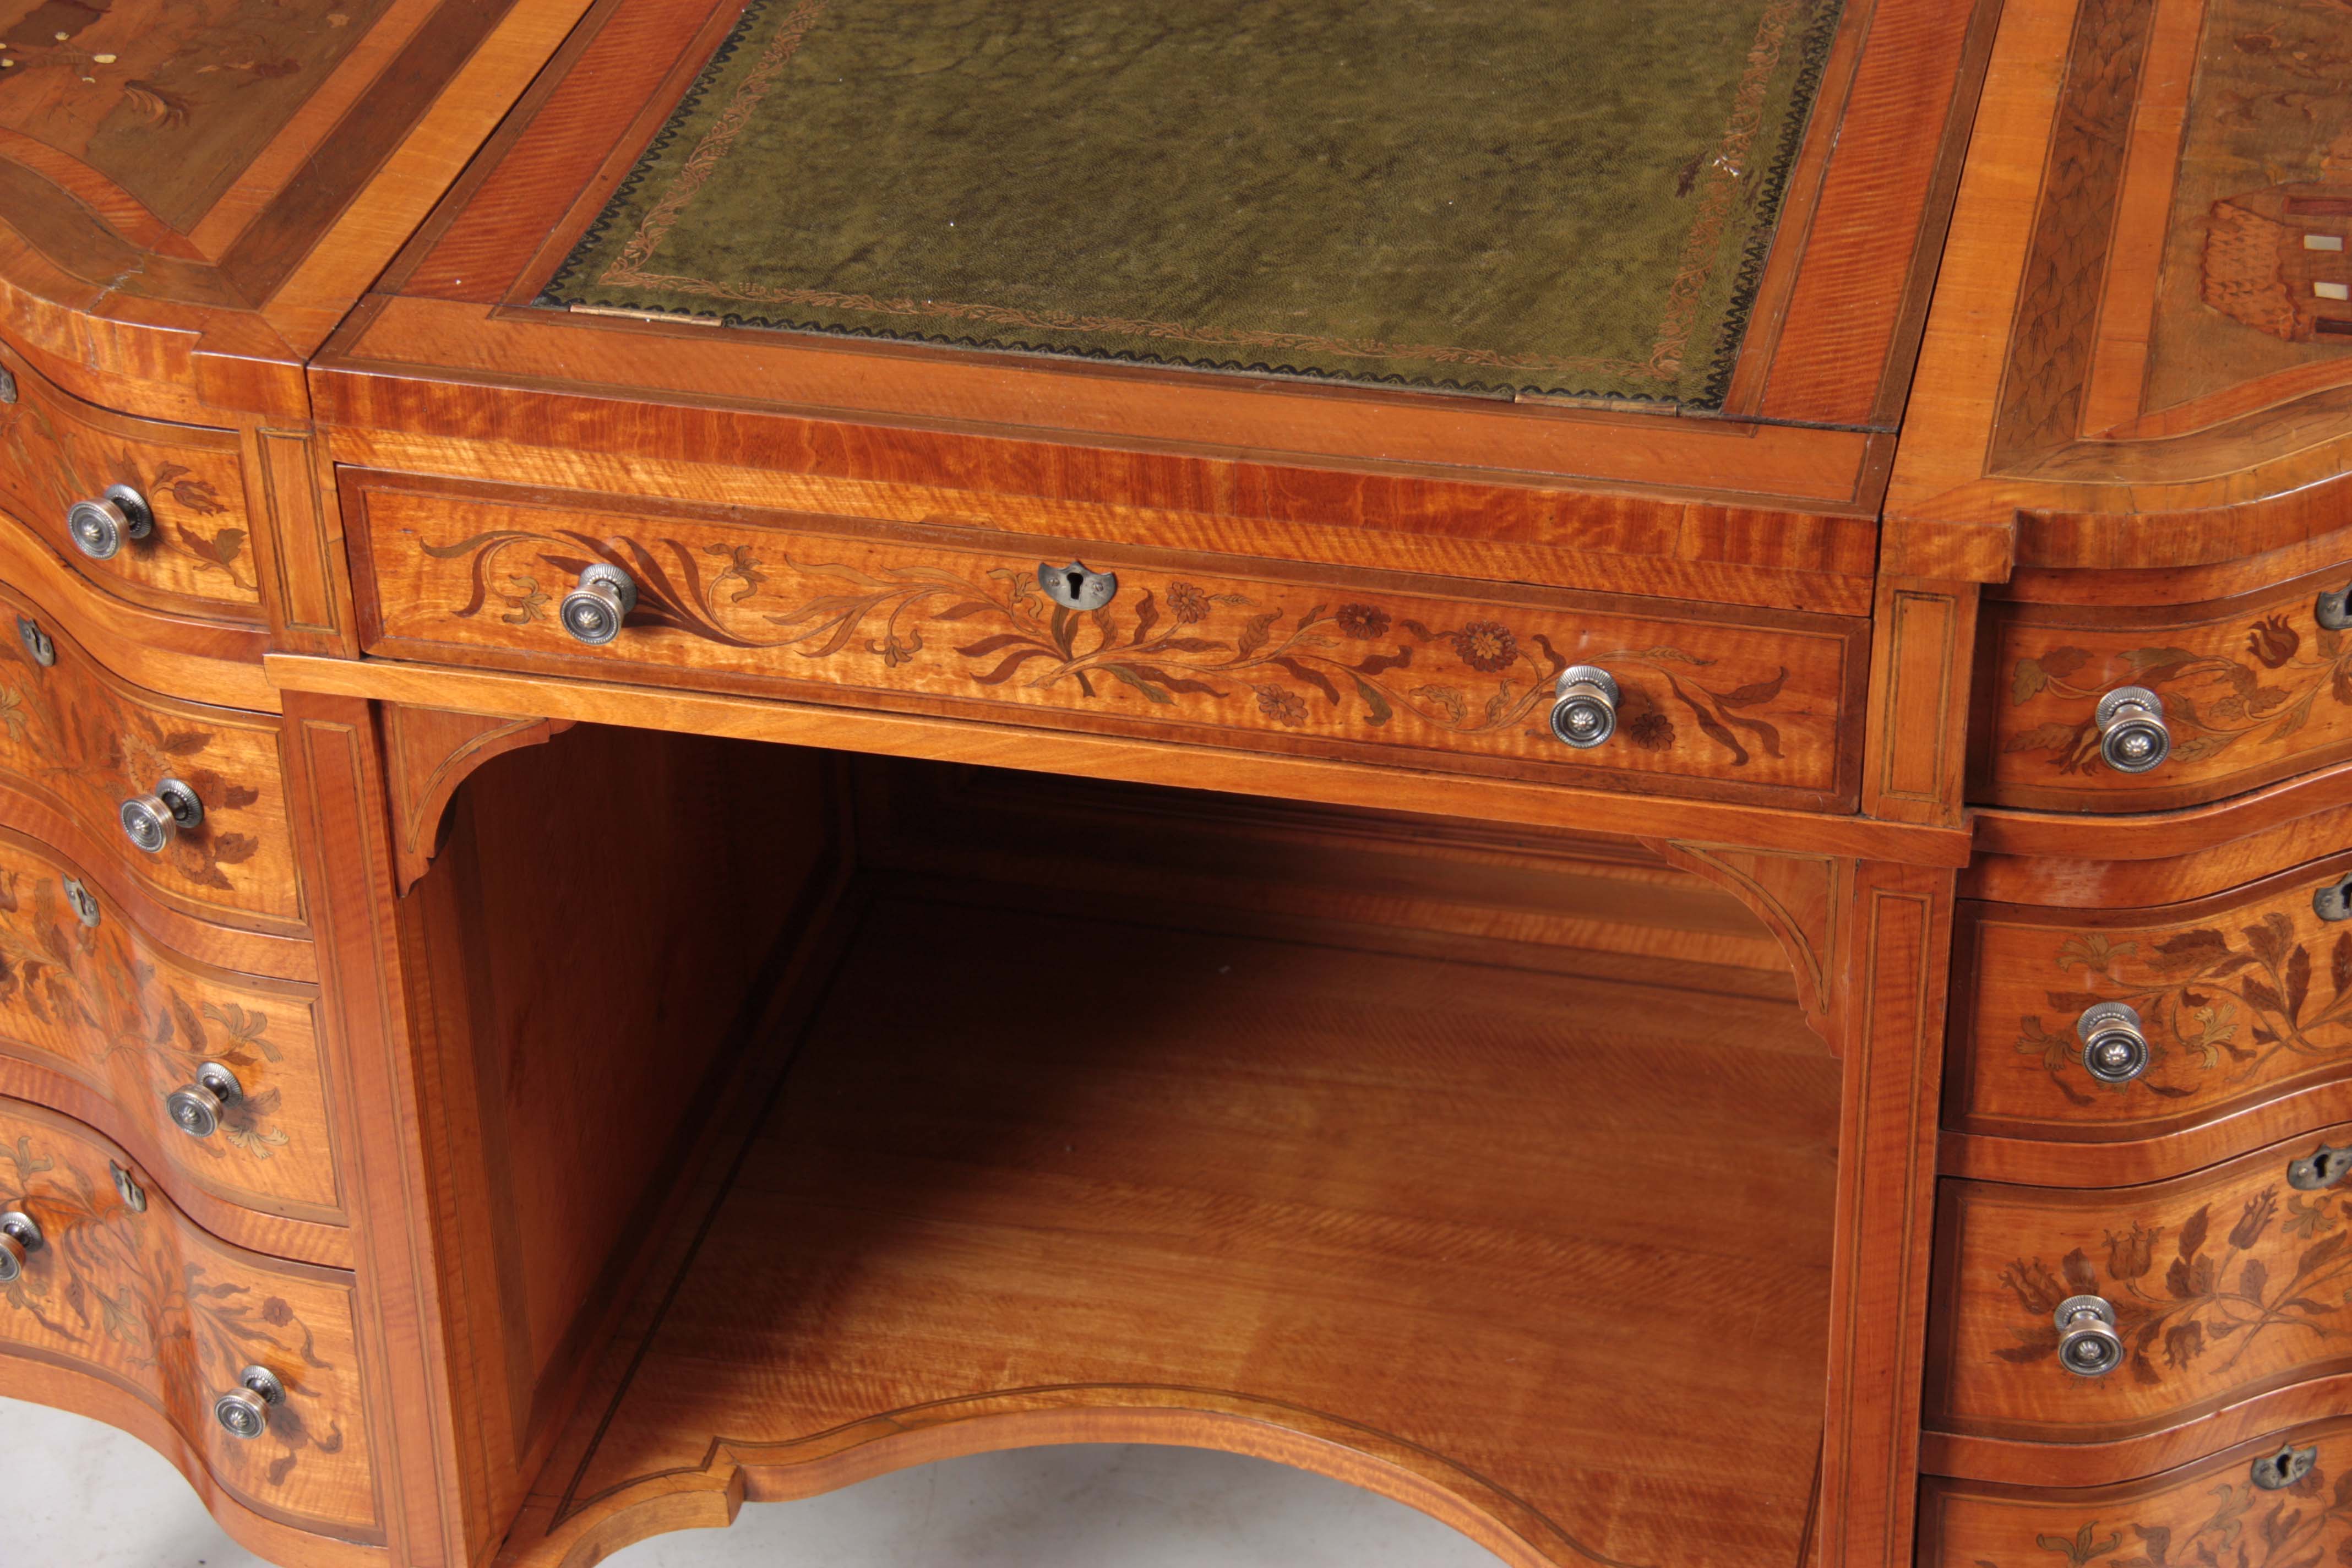 AN UNUSUAL FREESTANDING VICTORIAN SATINWOOD INLAID DESK with floral inlaid serpentine drawers to the - Image 3 of 8